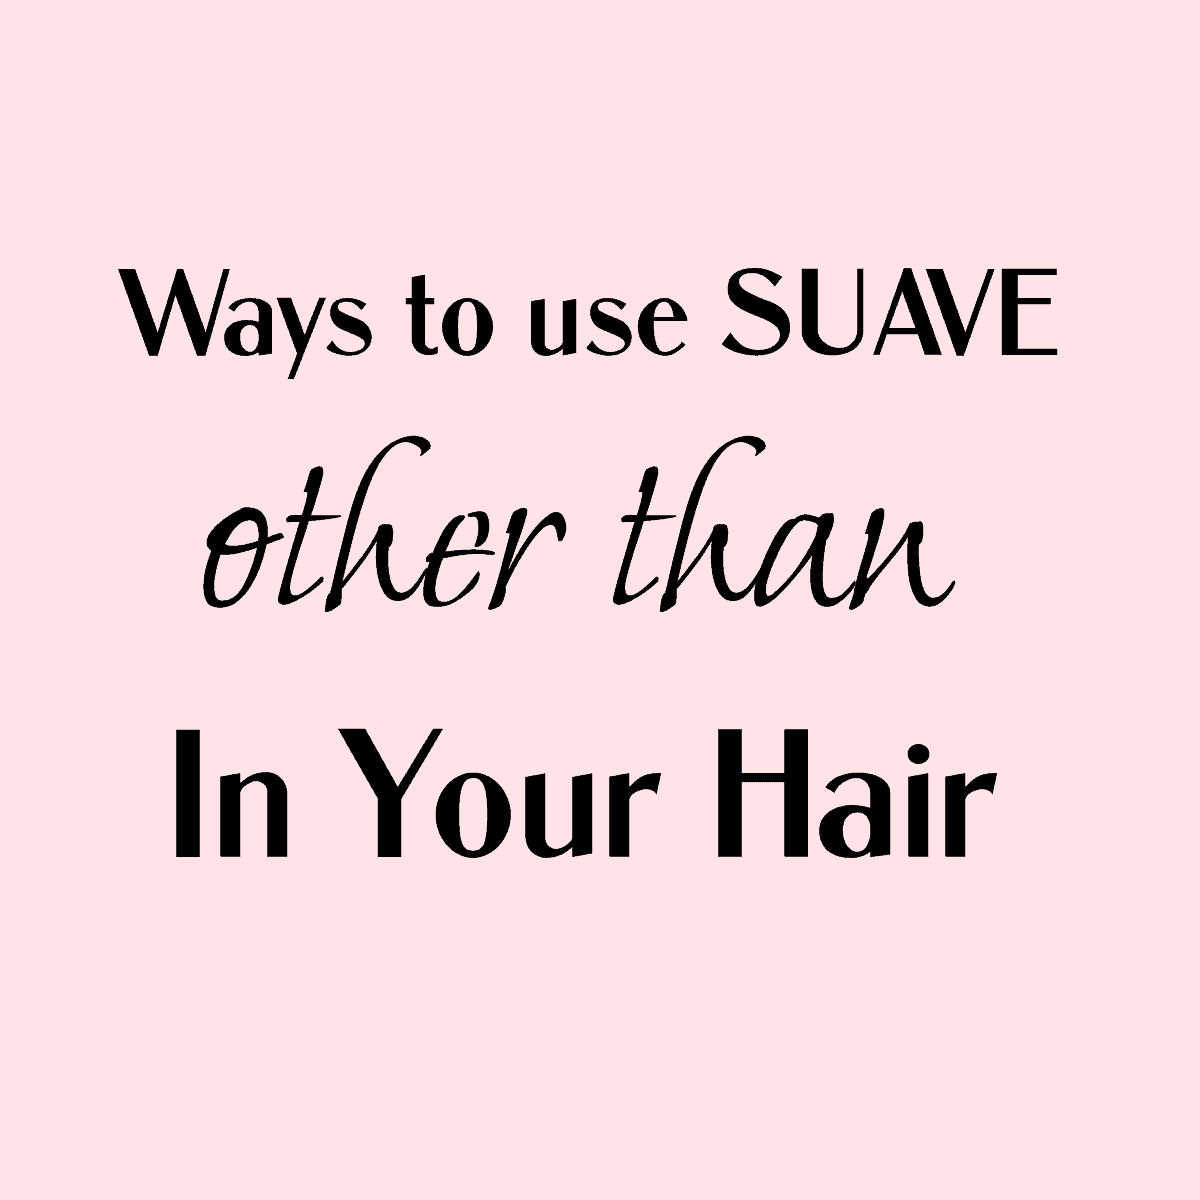 using suave for other things than in your hair.